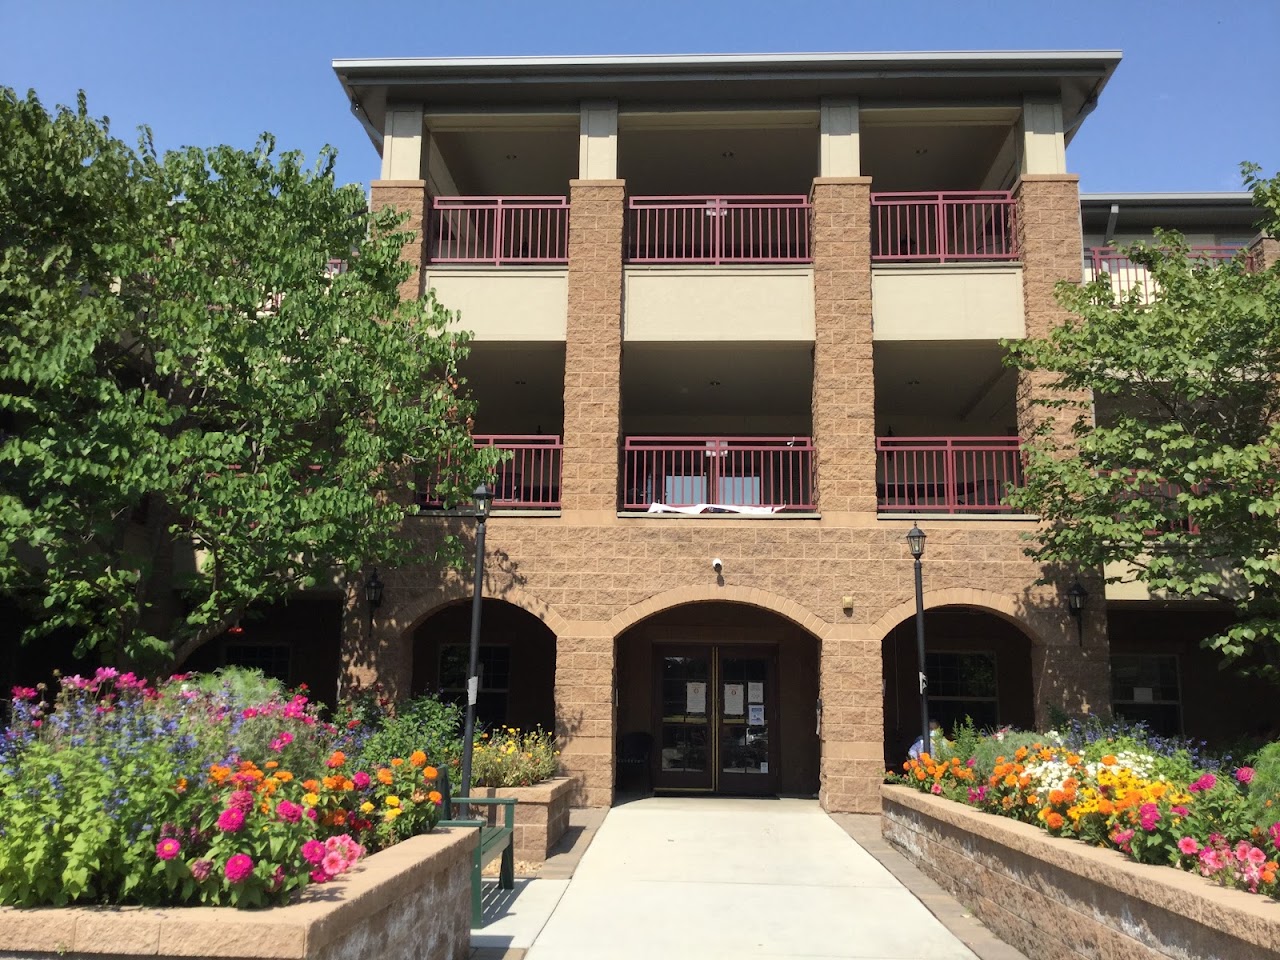 Photo of GRANVILLE ASSISTED LIVING FACILITY at 1325 VANCE ST LAKEWOOD, CO 80214